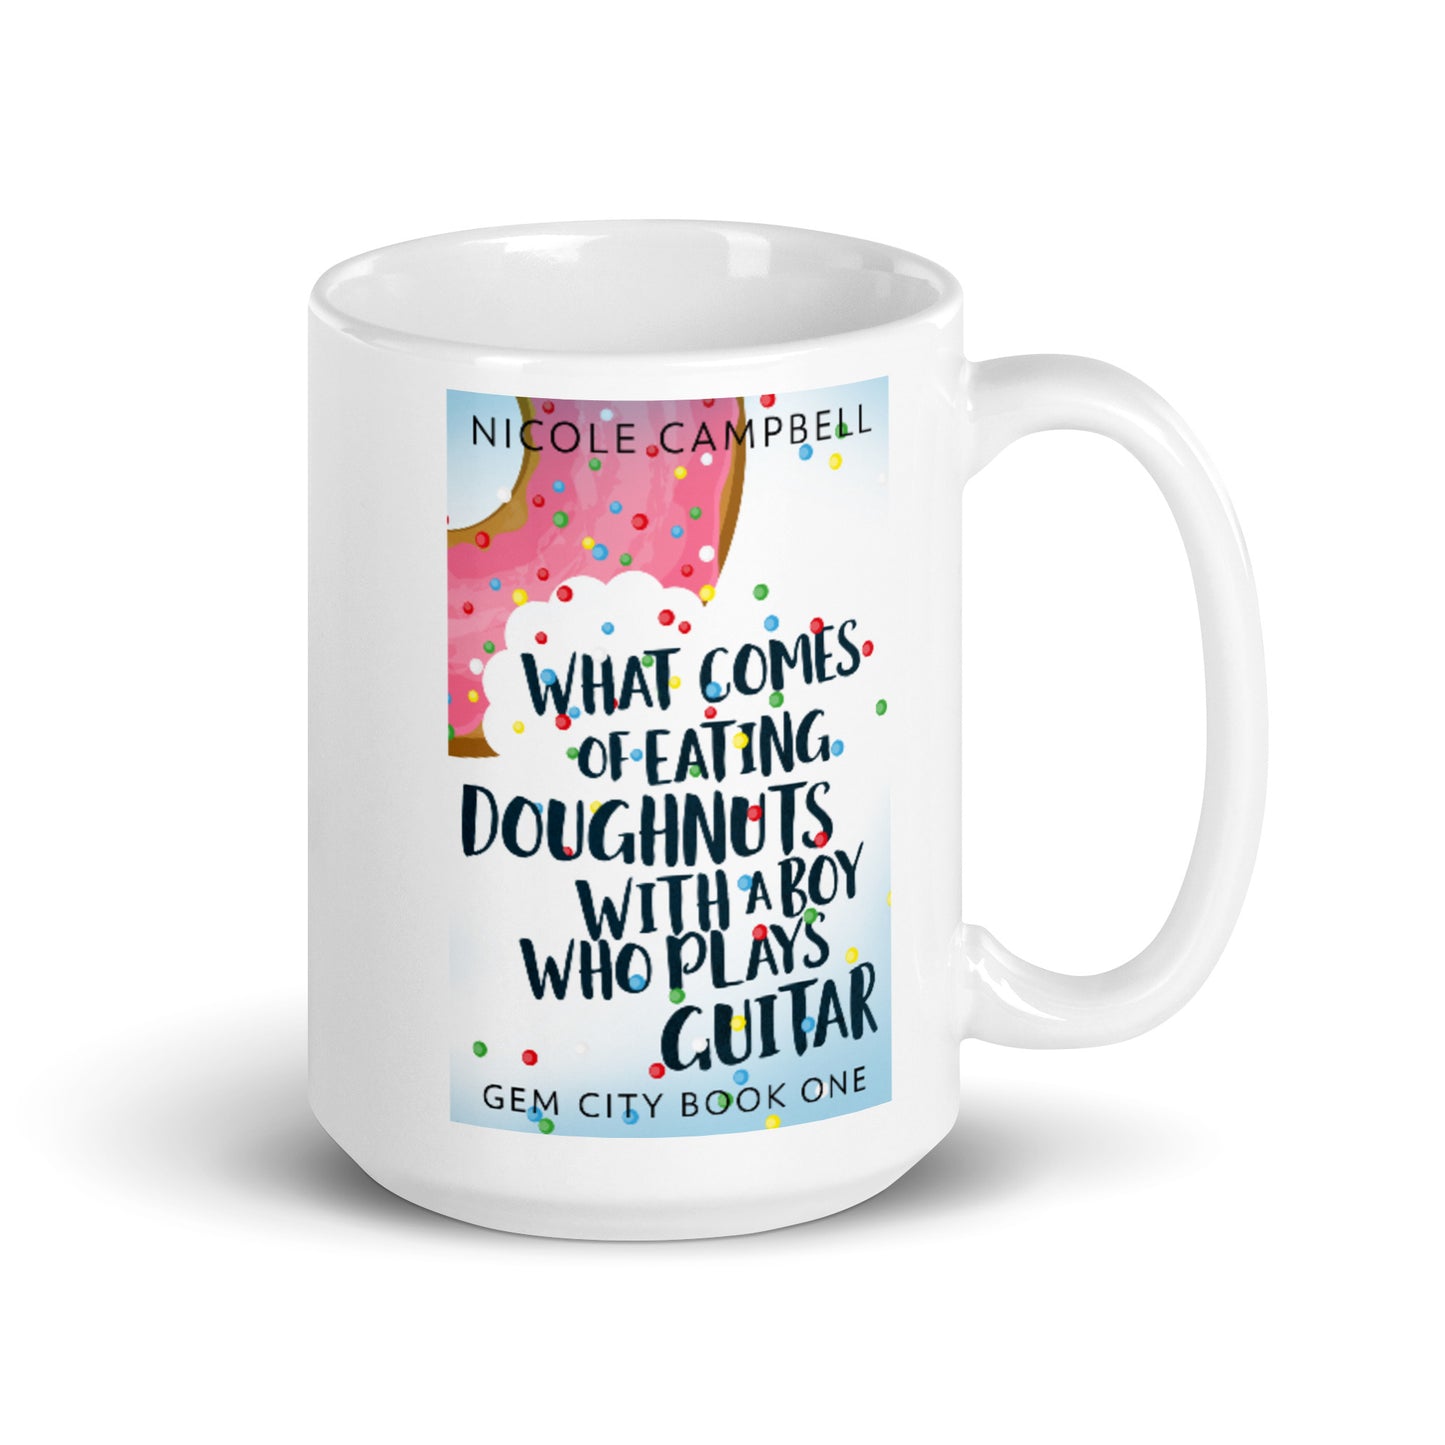 What Comes of Eating Doughnuts With a Boy Who Plays Guitar - White Coffee Mug